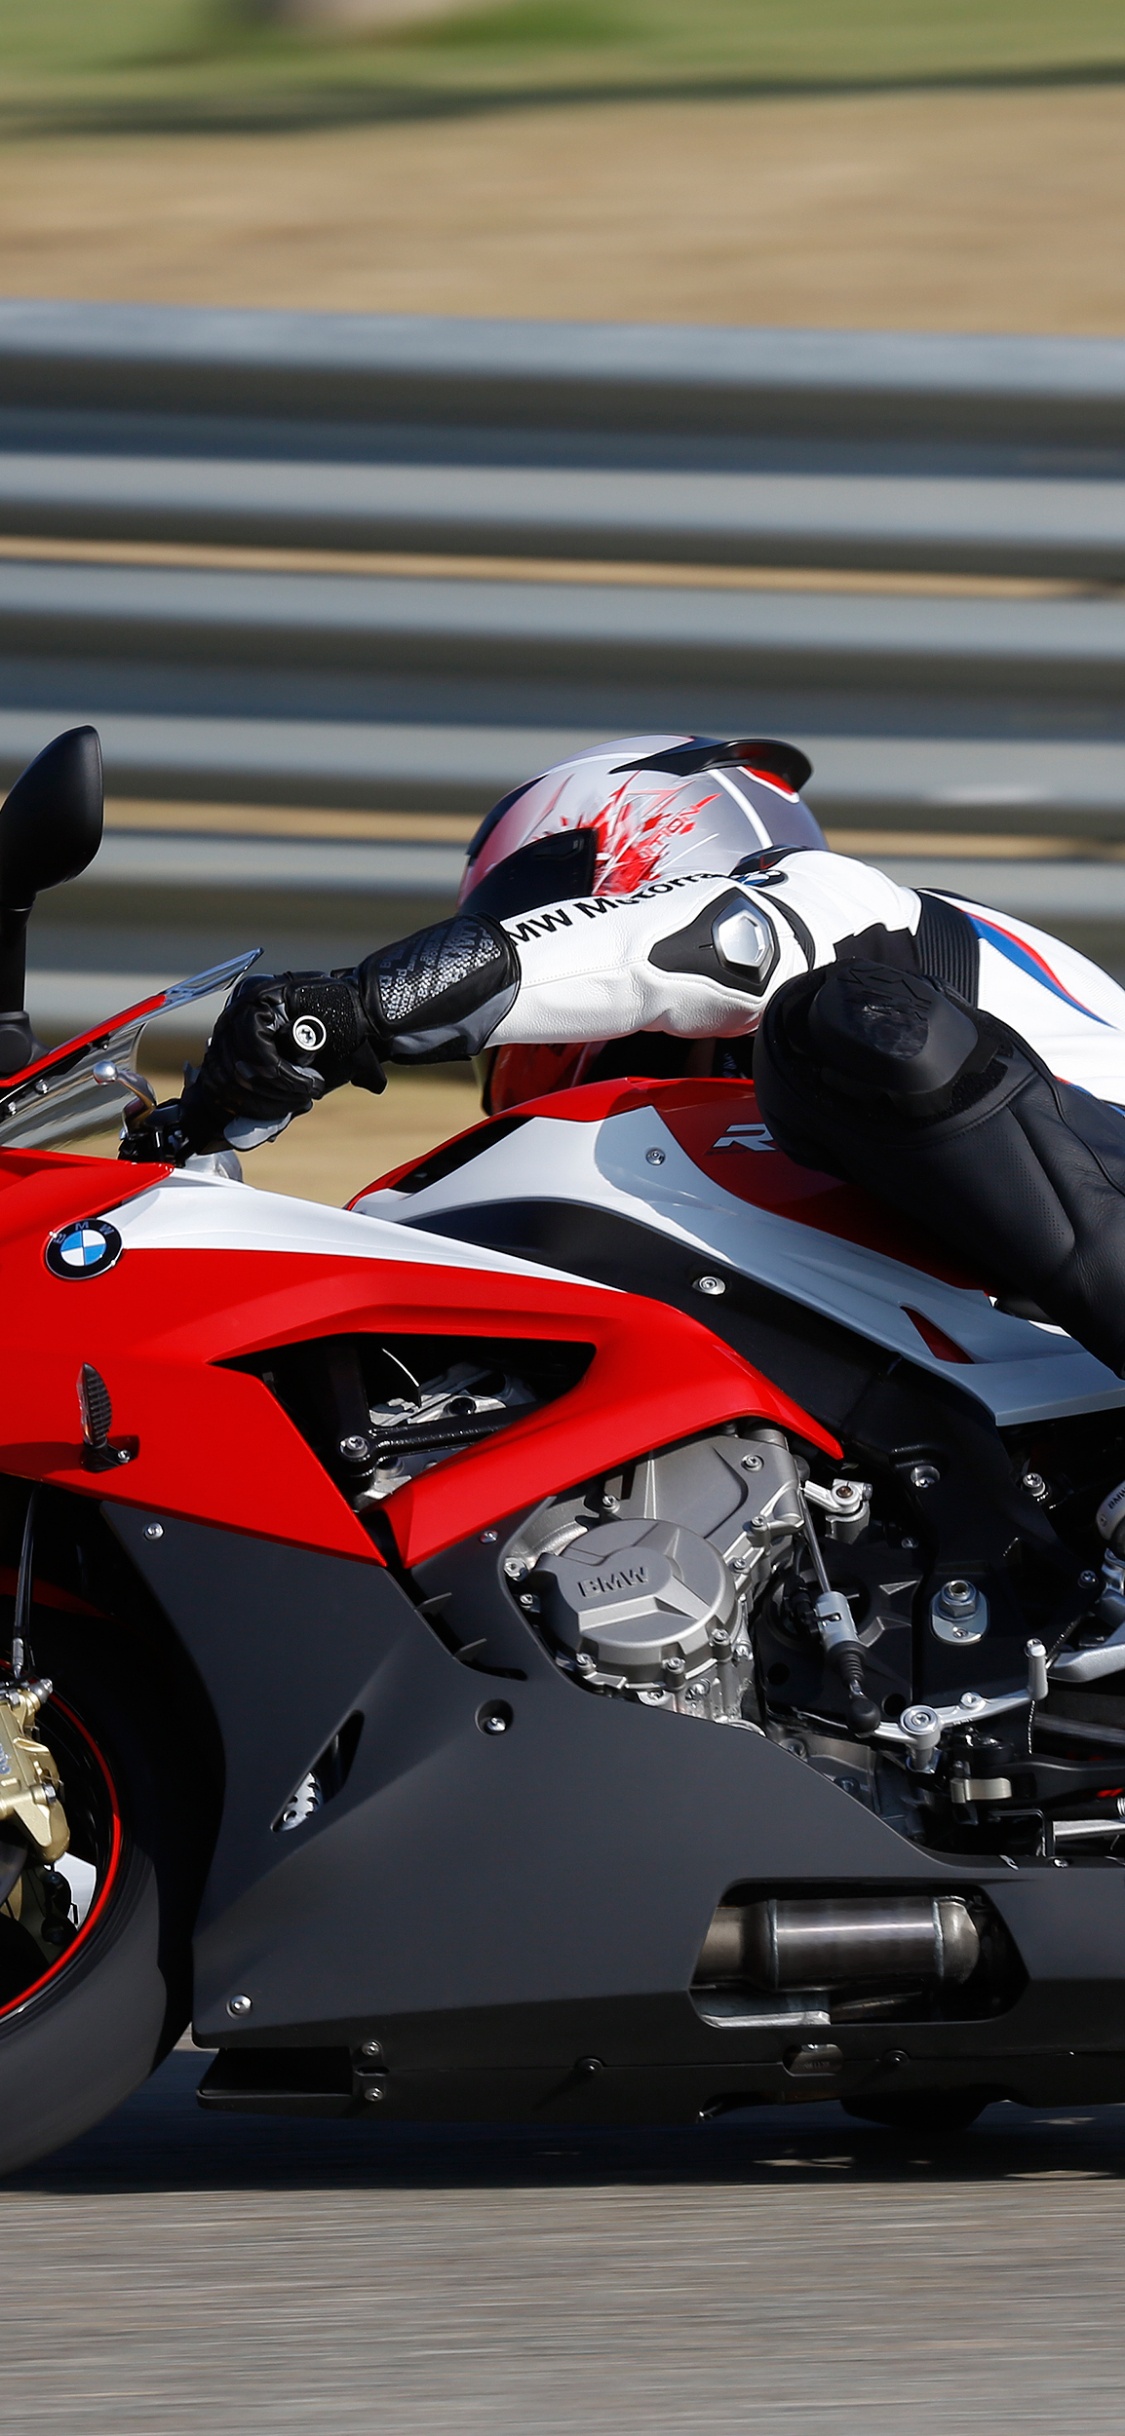 Man in Black and Red Sports Bike Helmet Riding on Red and Black Sports Bike. Wallpaper in 1125x2436 Resolution